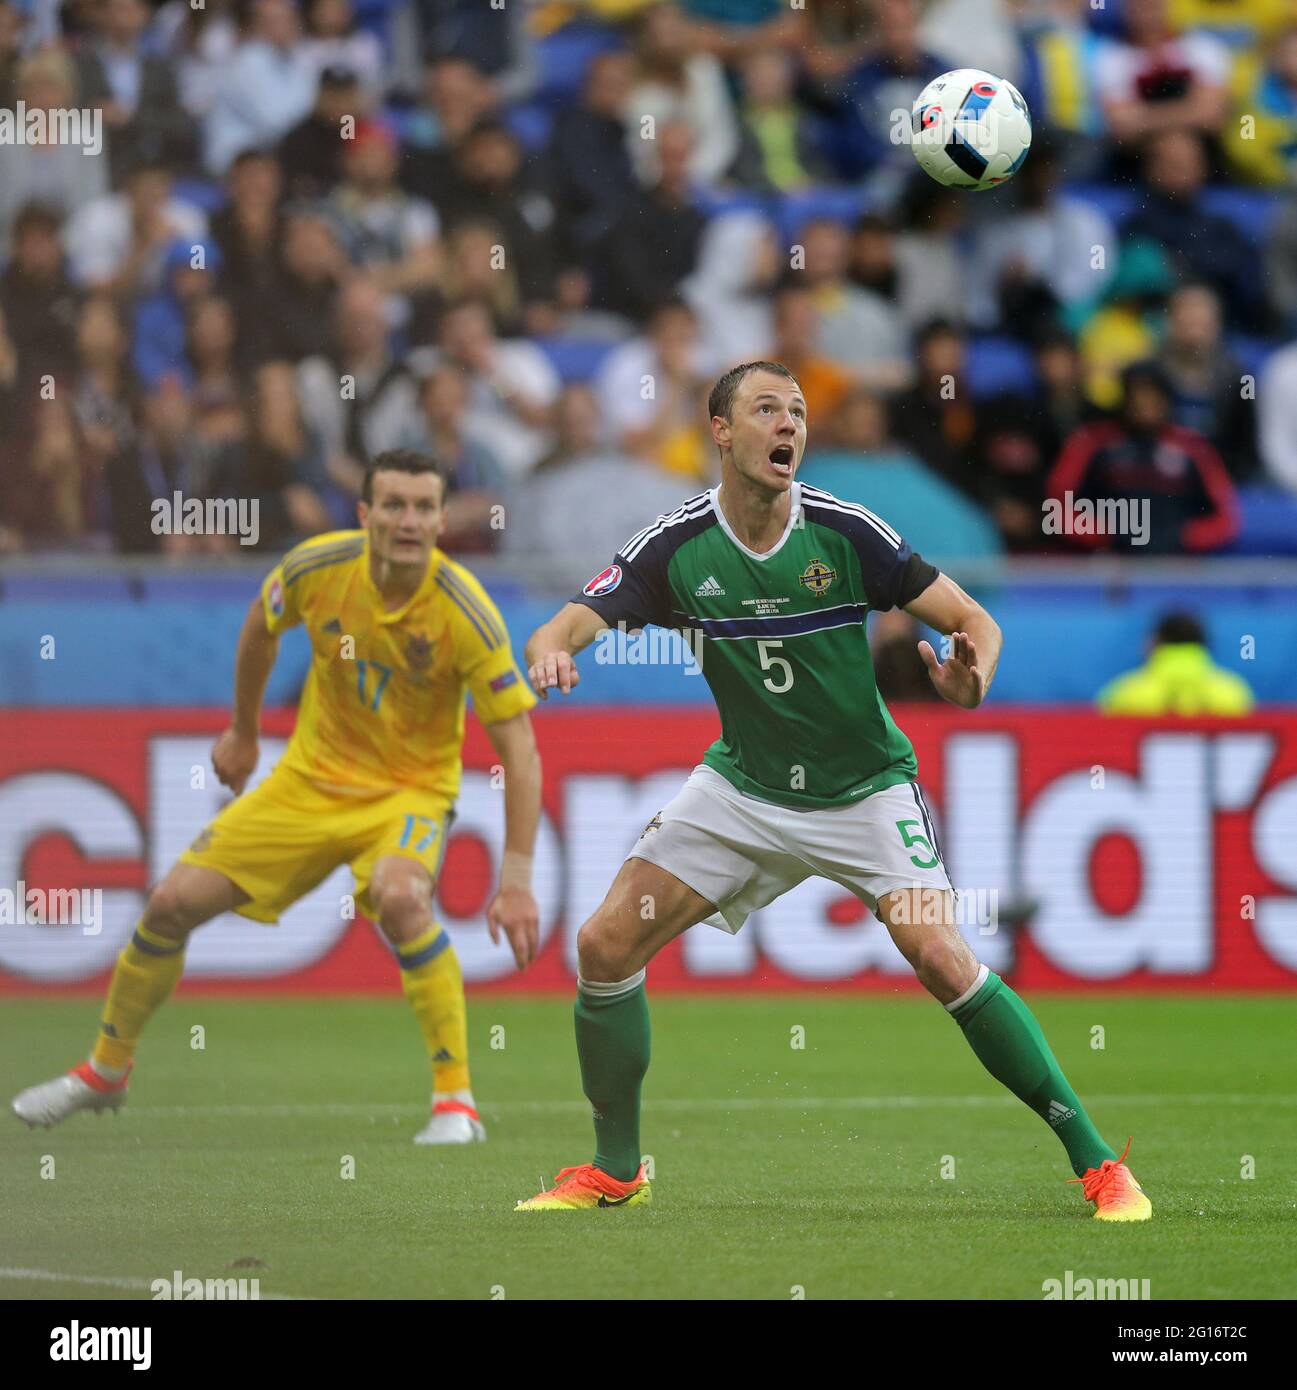 LYON, FRANCE - JUNE 16, 2016: Jonny Evans of Northern Ireland in action during UEFA EURO 2016 game against Ukraine at Stade de Lyon stadium in Lyon. Northern Ireland won 2-0 Stock Photo